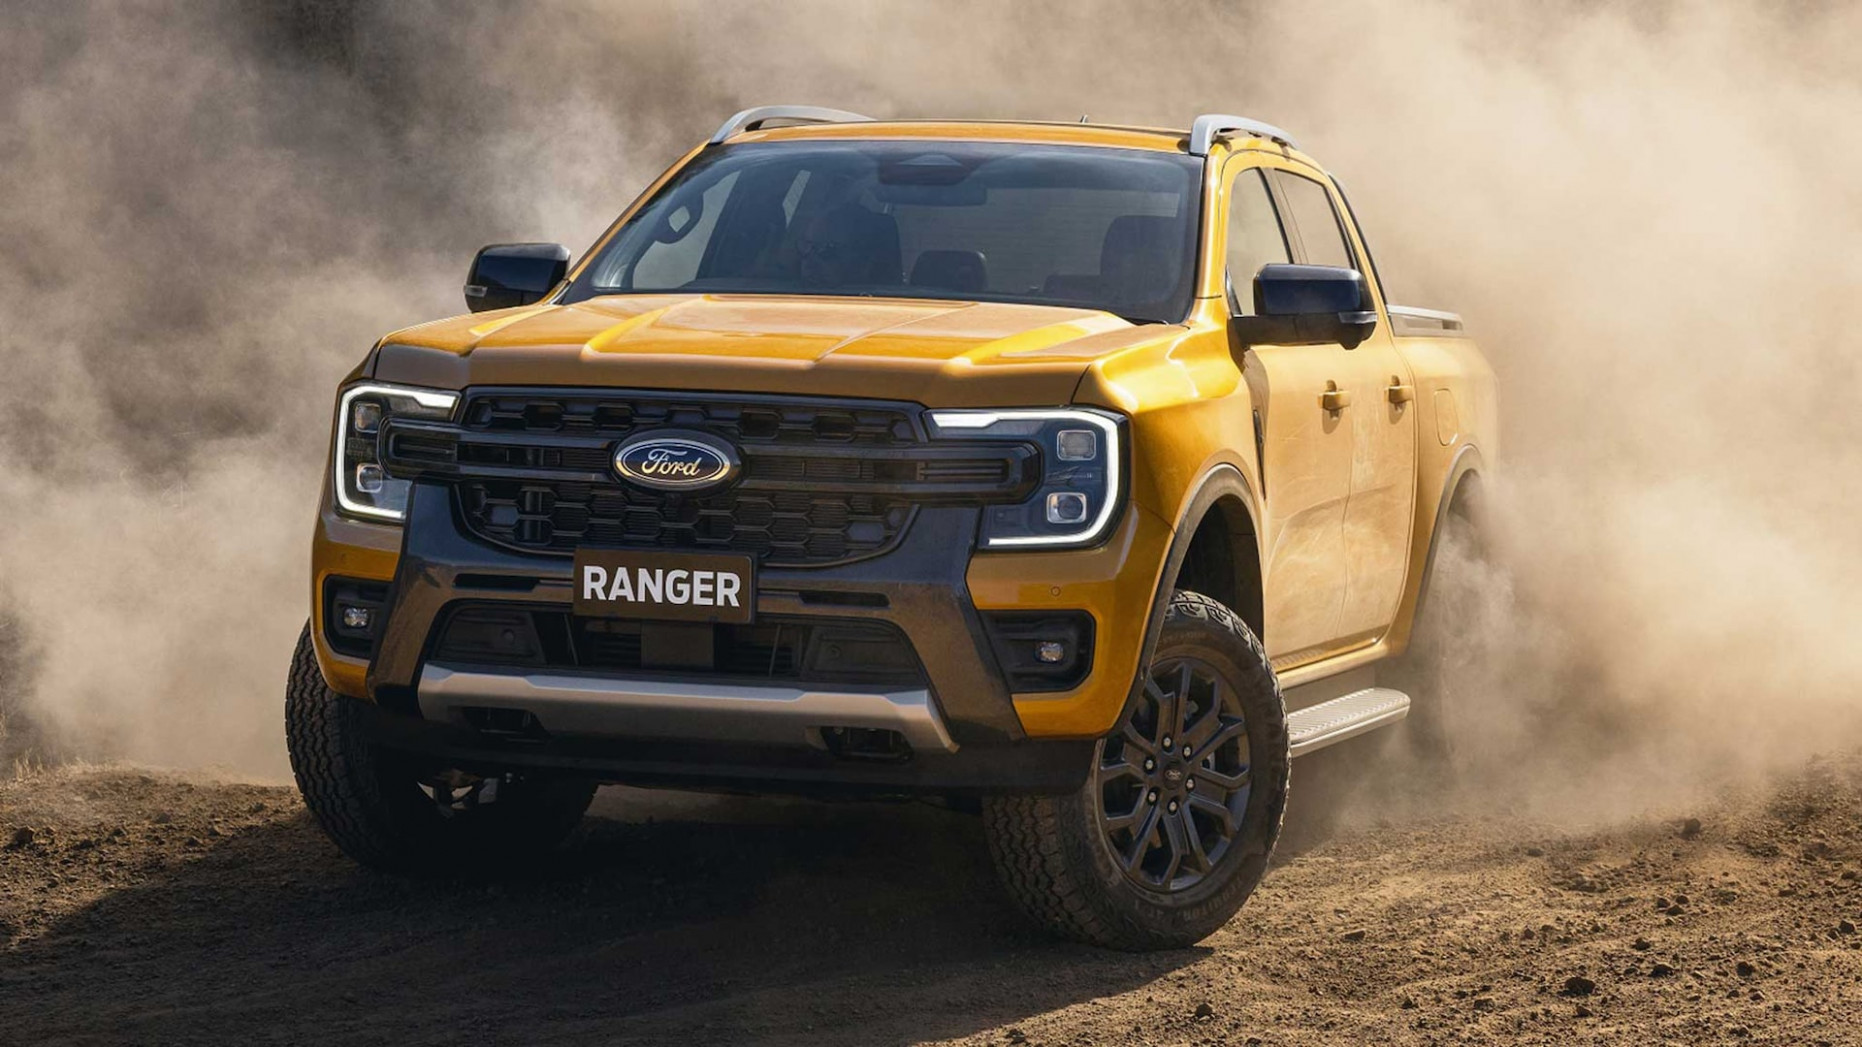 4 Ford Ranger Buyer's Guide: Reviews, Specs, Comparisons 2023 Ford Ranger Images